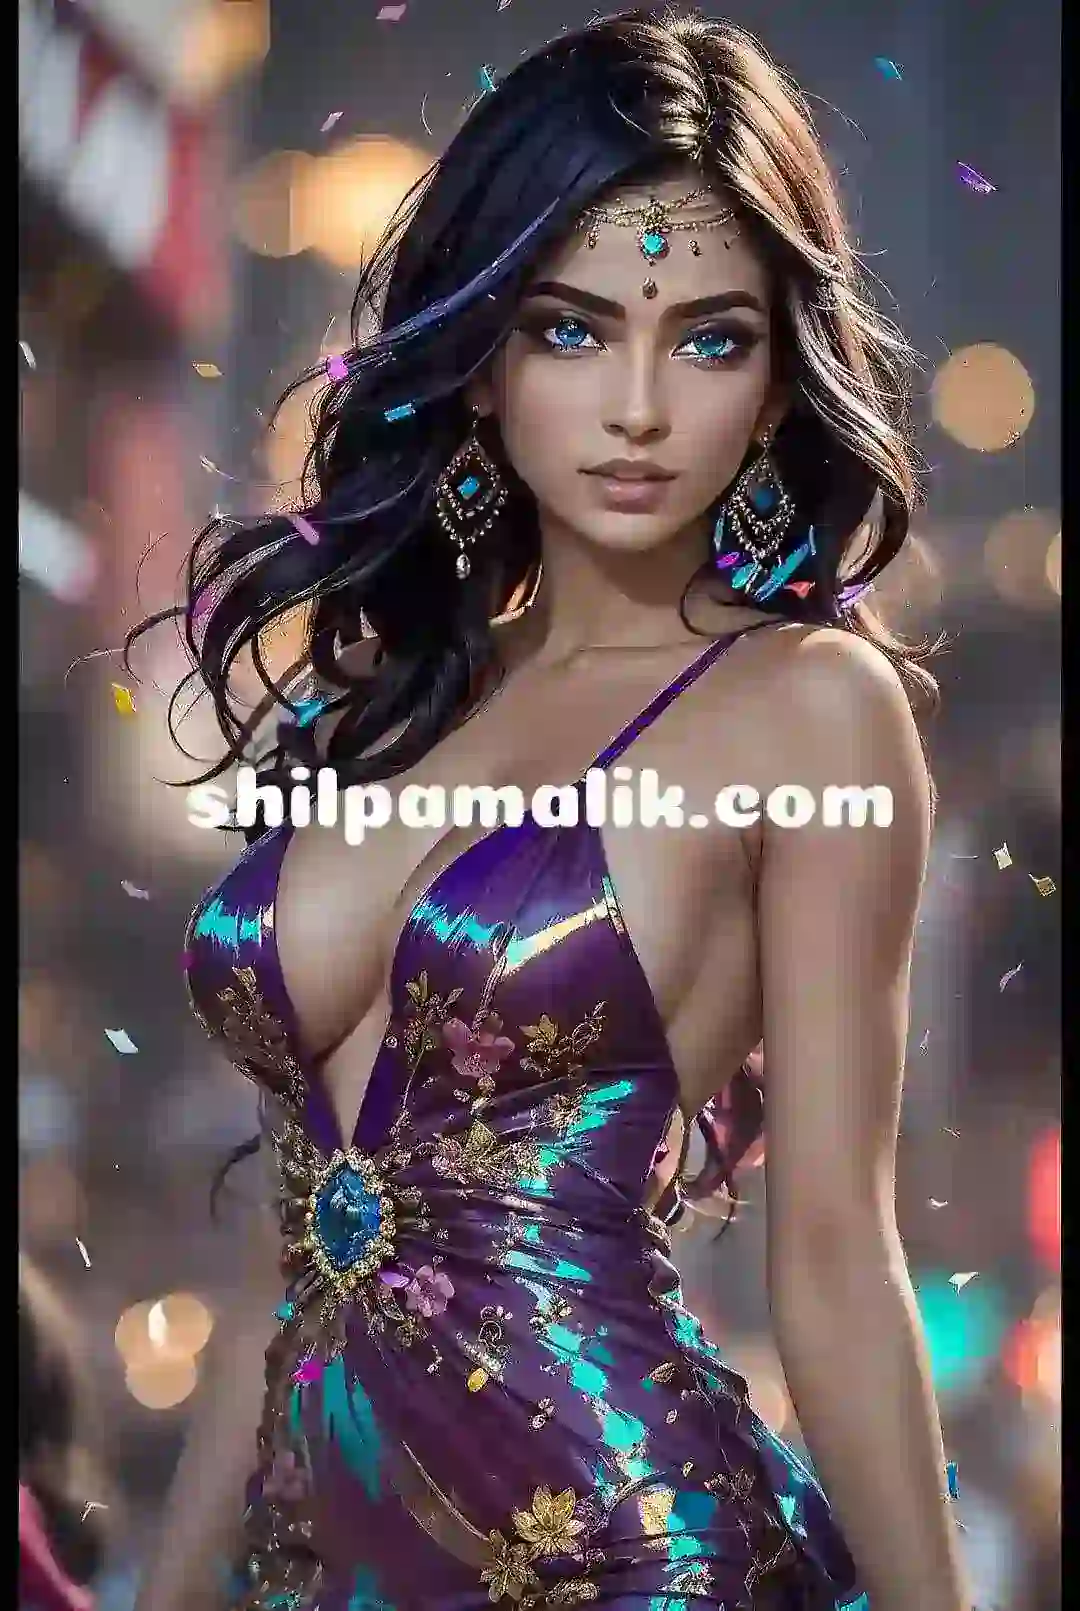 call girls in udaipur